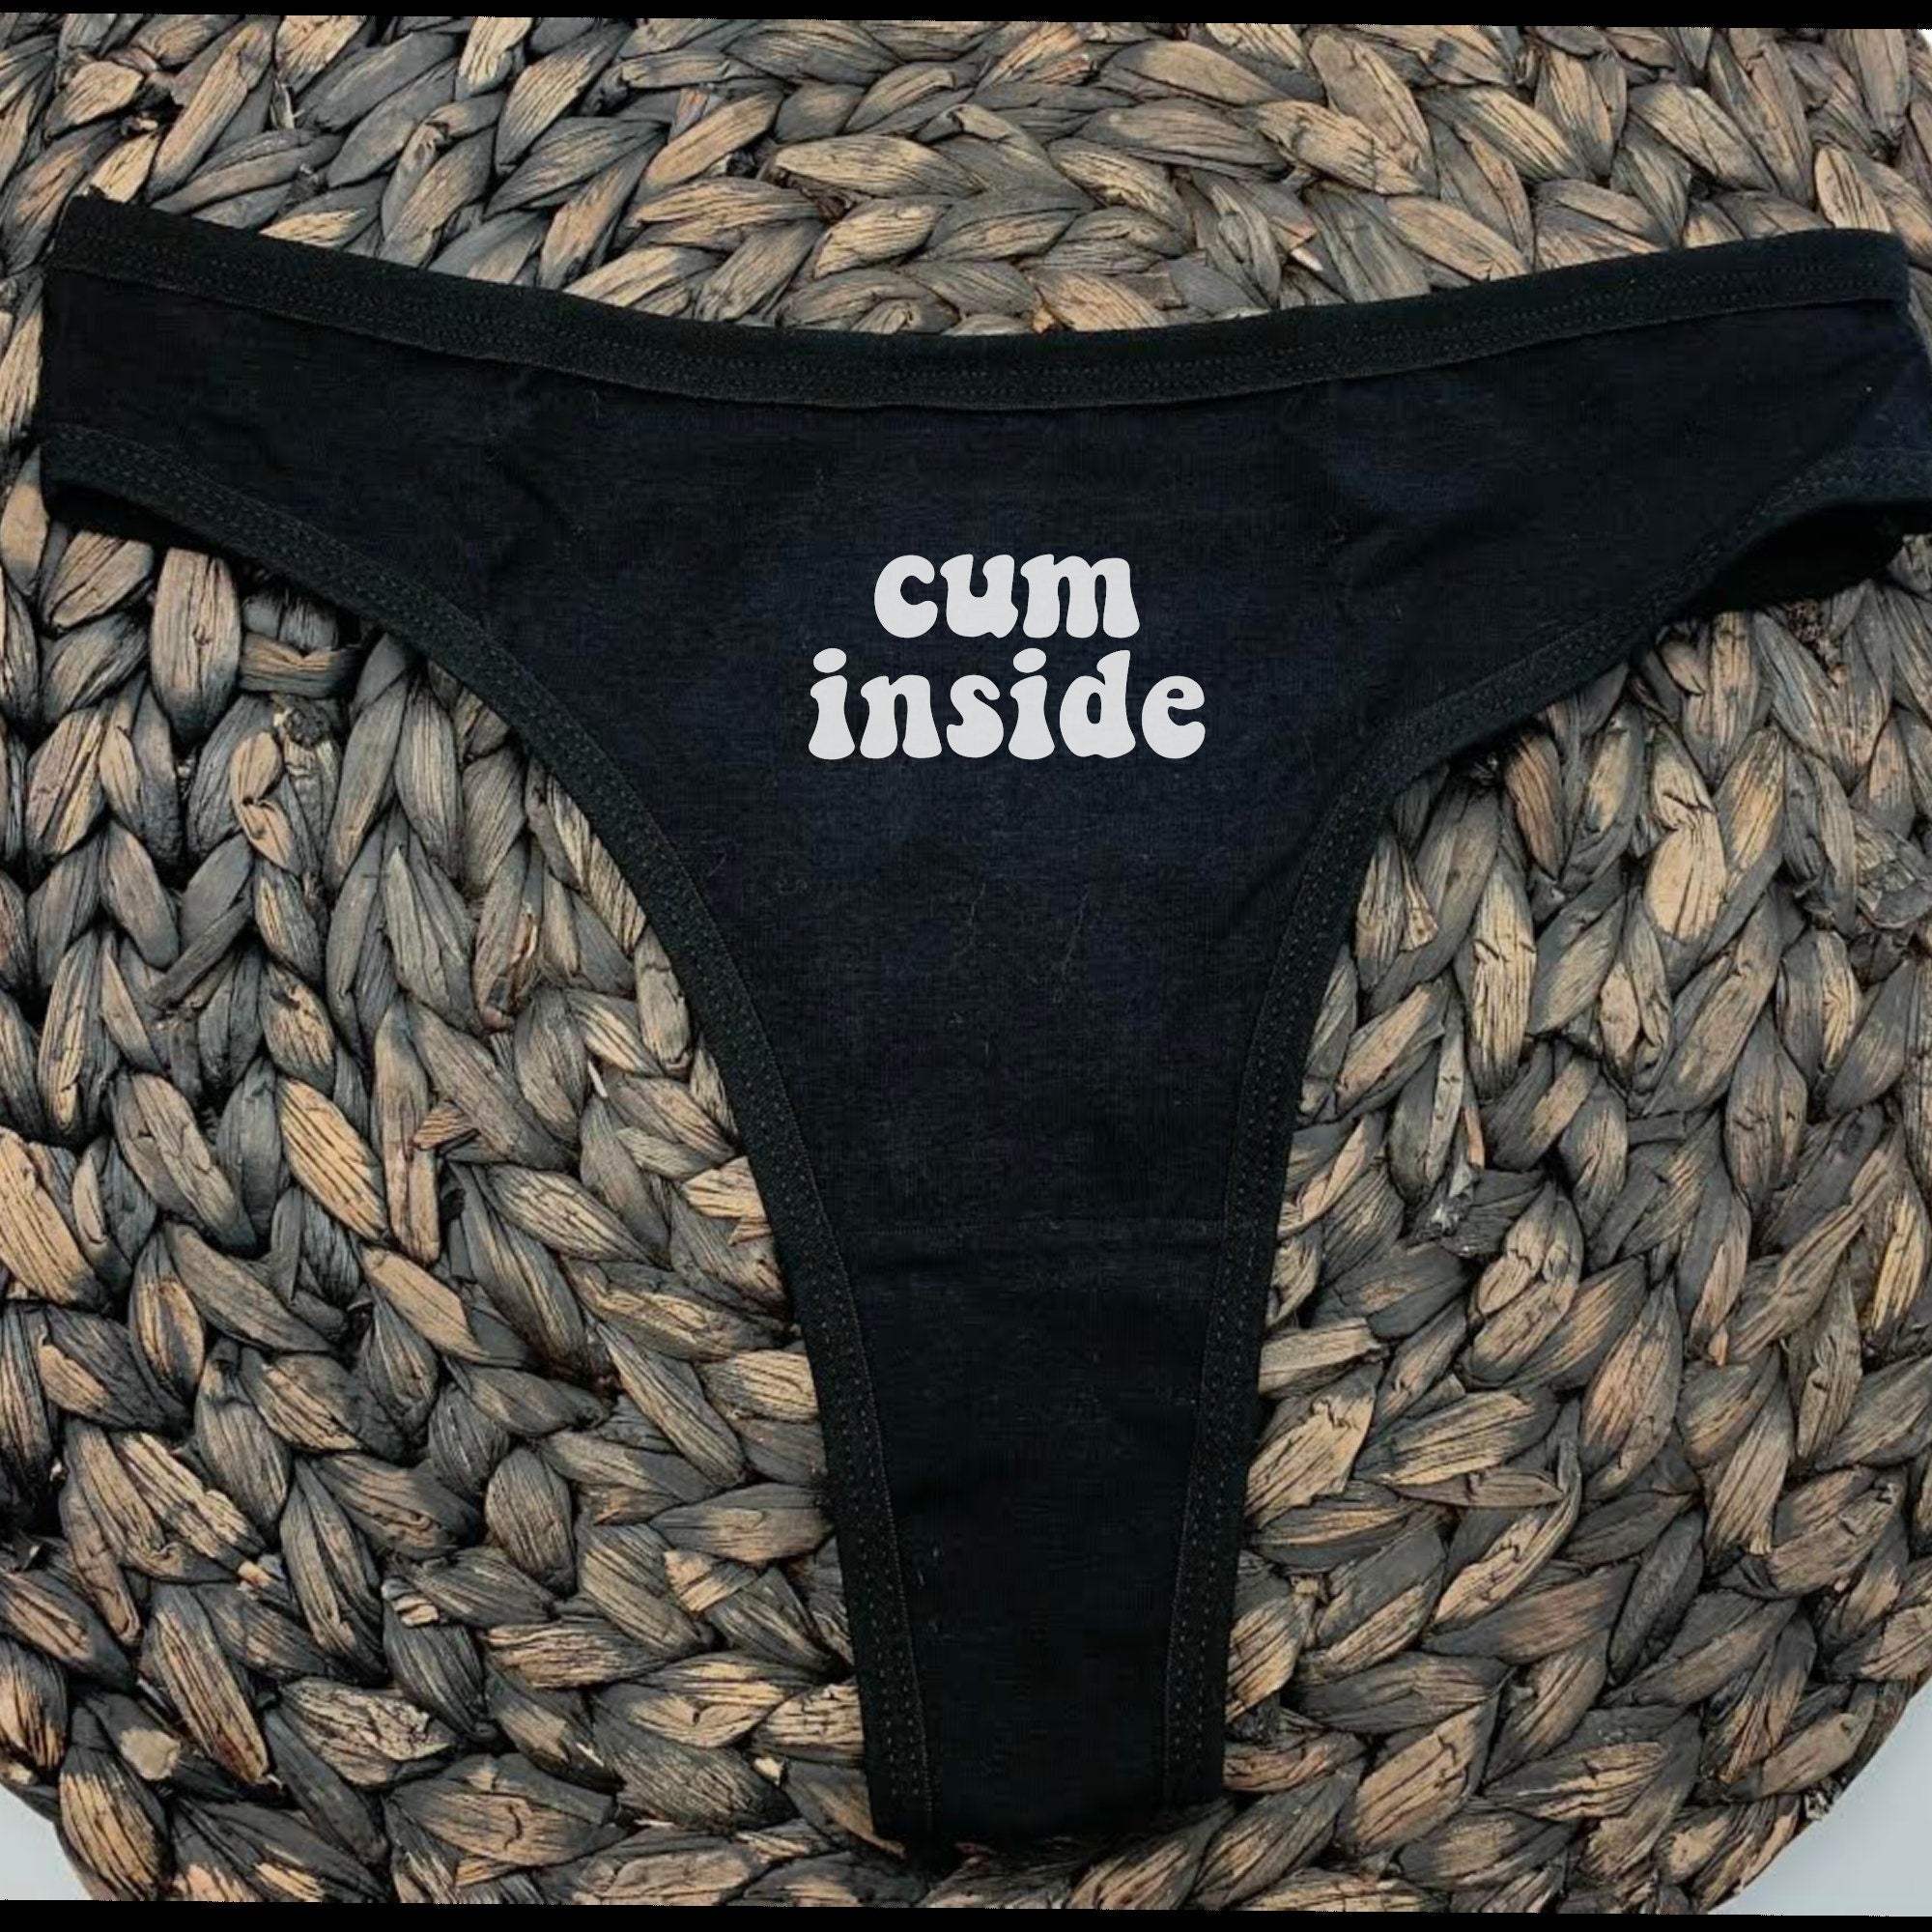 Funny Thong Panty with 'Cum Inside' Humorous Print - Comfortable & Playful Underwear